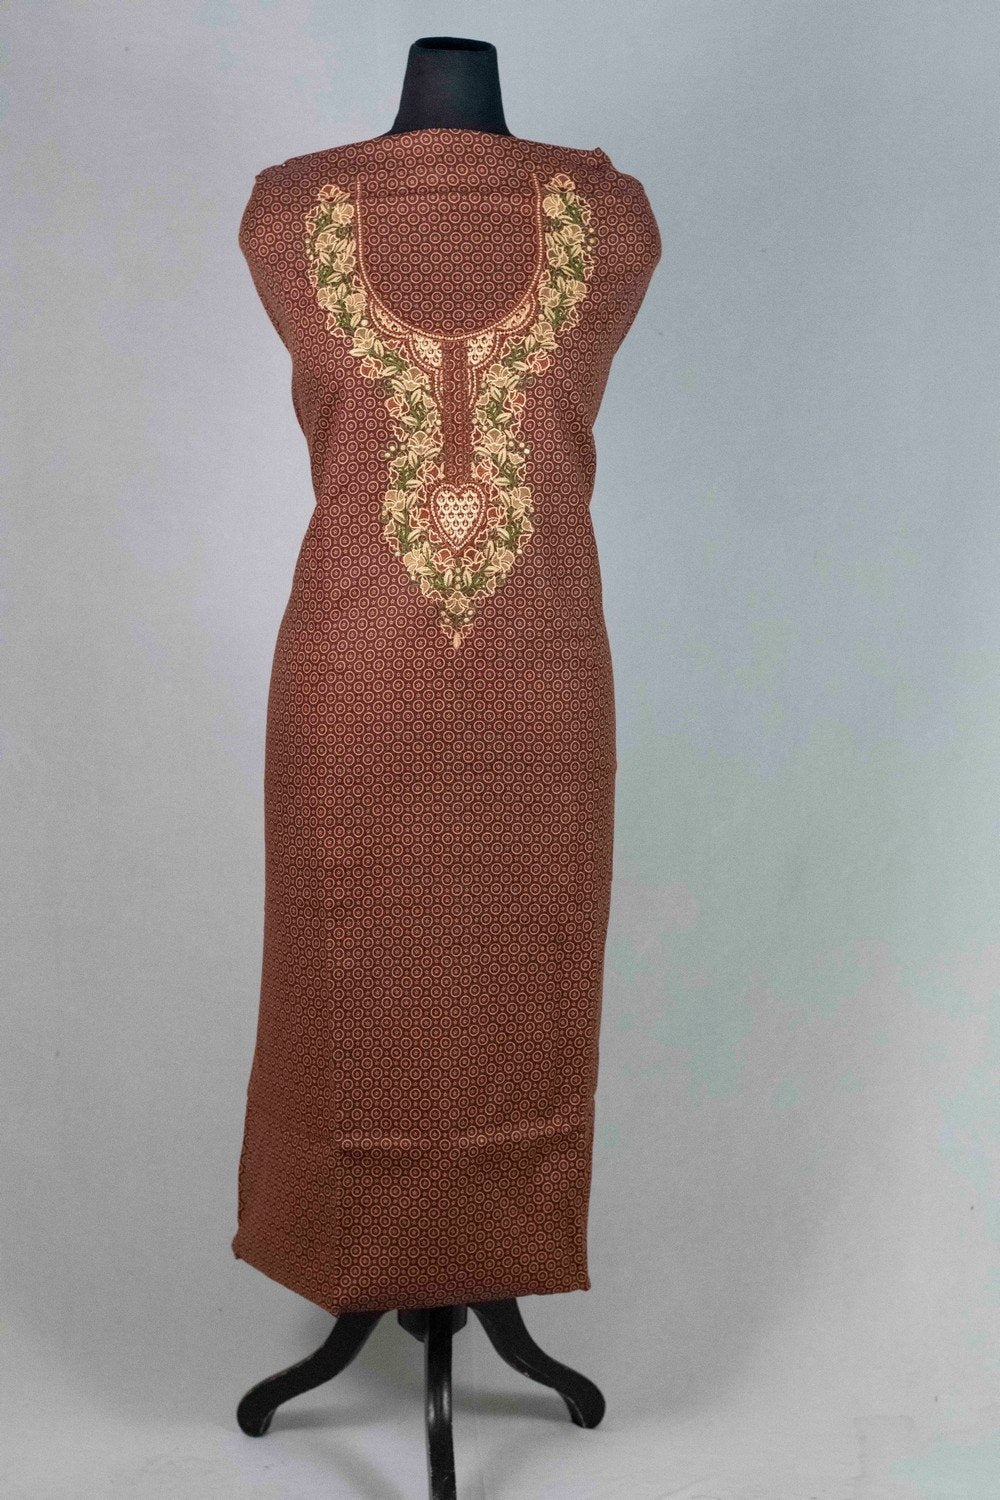 Brown Colour Woolen Kani Printed Suit With Neck And Over